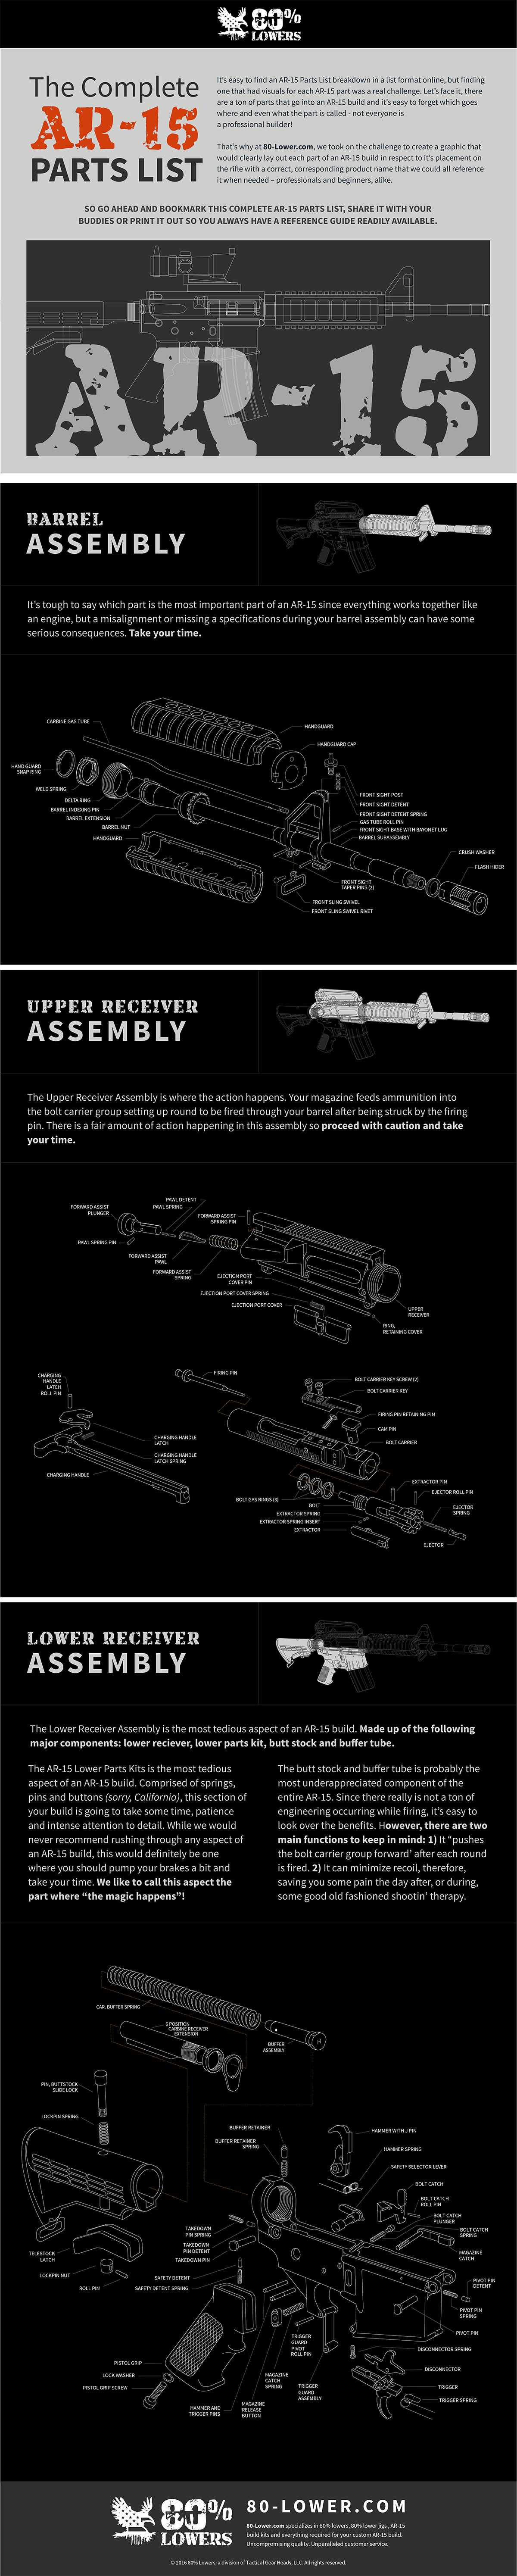 The Complete AR 15 Parts List & AR 15 Build List [Infographic] - 80% Lowers